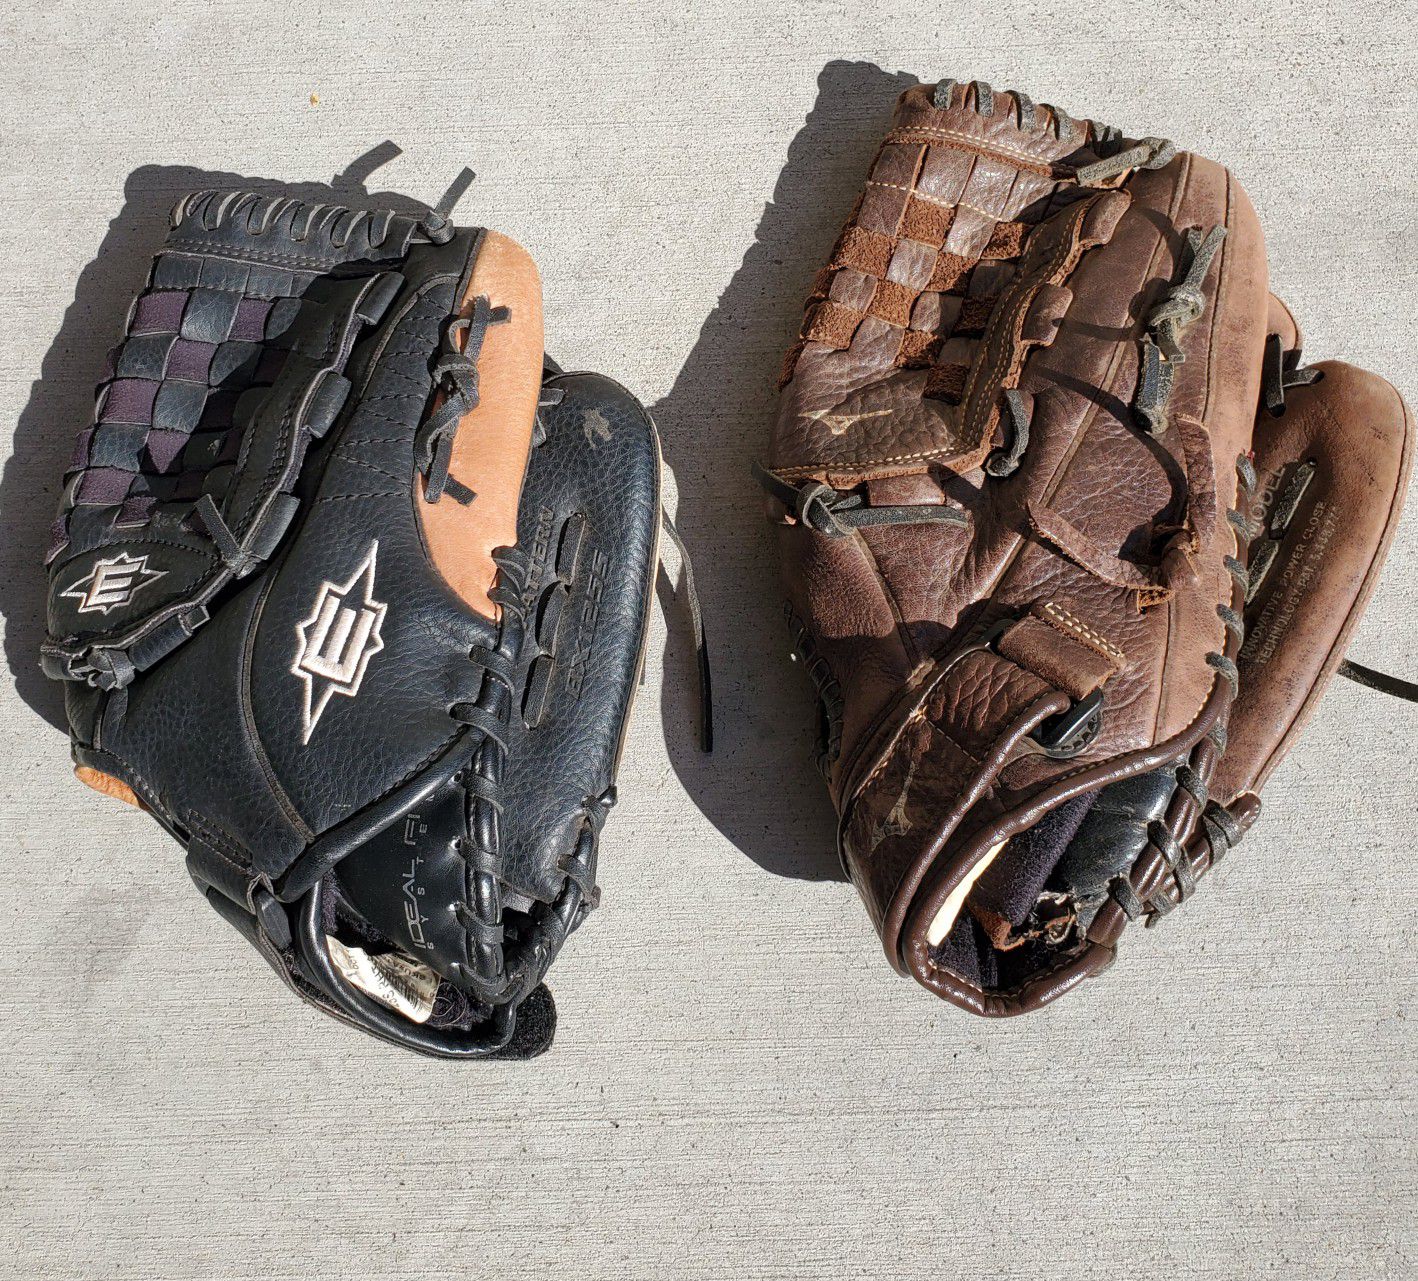 $10 each adult Baseball gloves size 12.5" and 13"